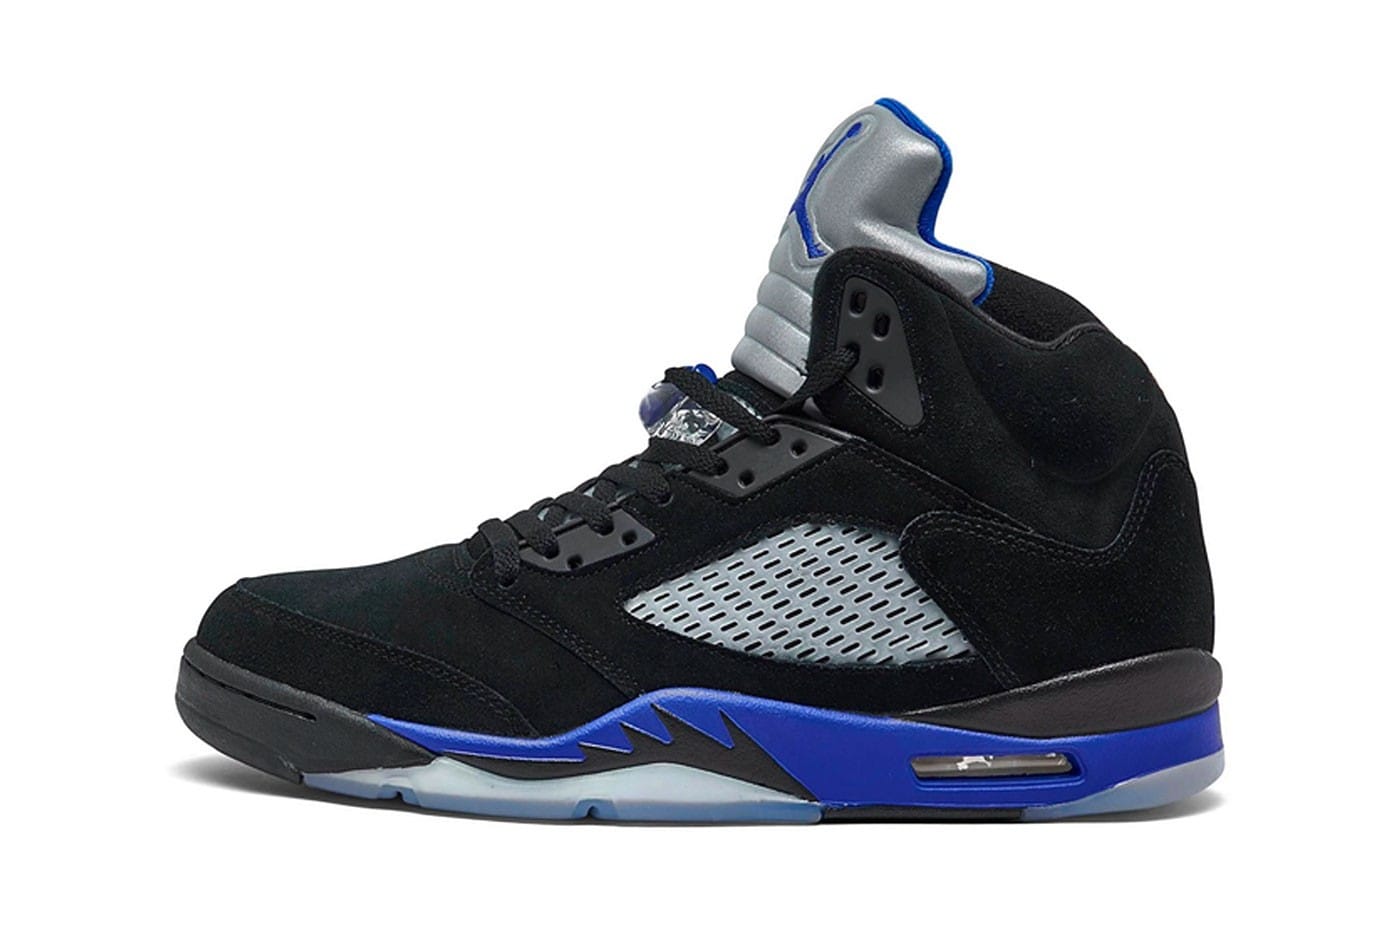 black and blue jordans that just came out